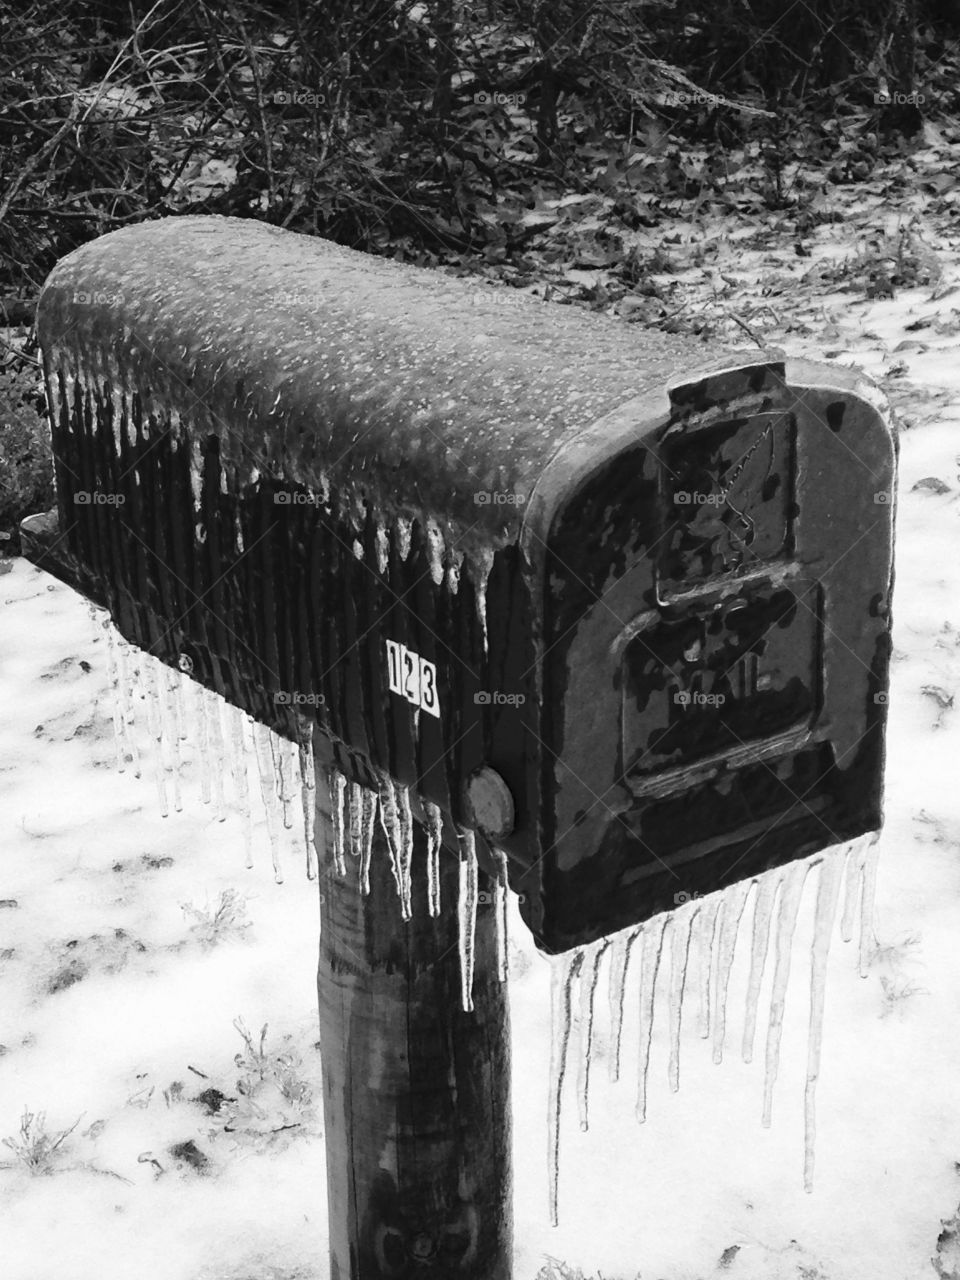 Black and white
Icicles 